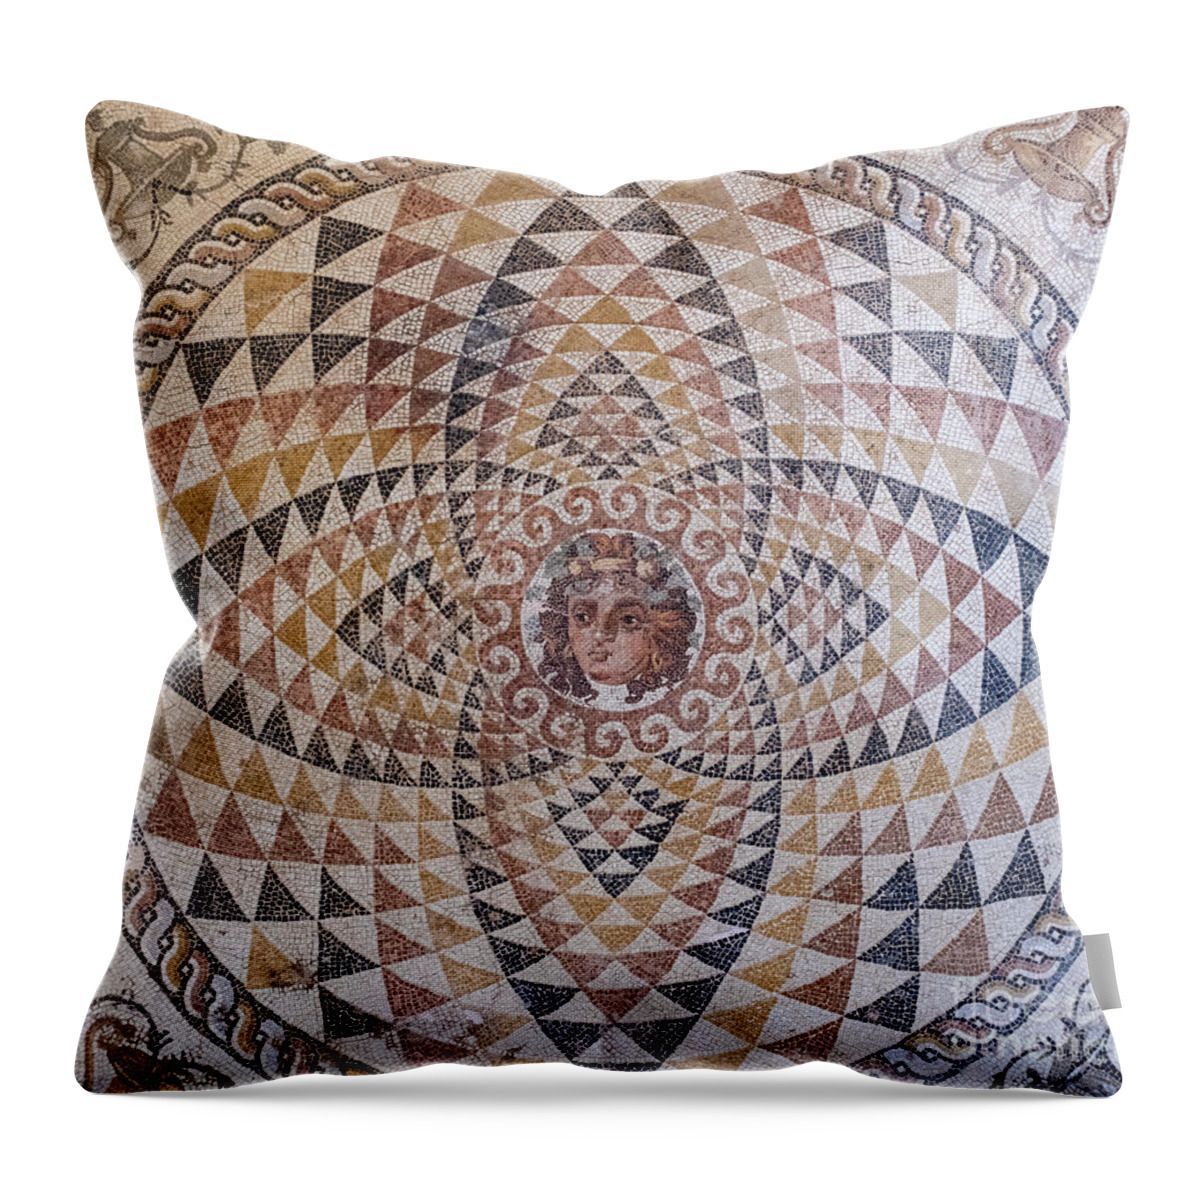 Throw pillow with a Mosaic with the head of Dionyssos from a Roman Villa in Greece buff.ly/3UoEFmw #finearts #WallArt #homedecor #art #AYearForArt #LoveArt #photography buff.ly/3x5pkxY or By buff.ly/3i3uCm2 #Dionyssos #Roman #tiles #floor #mosaic #greece